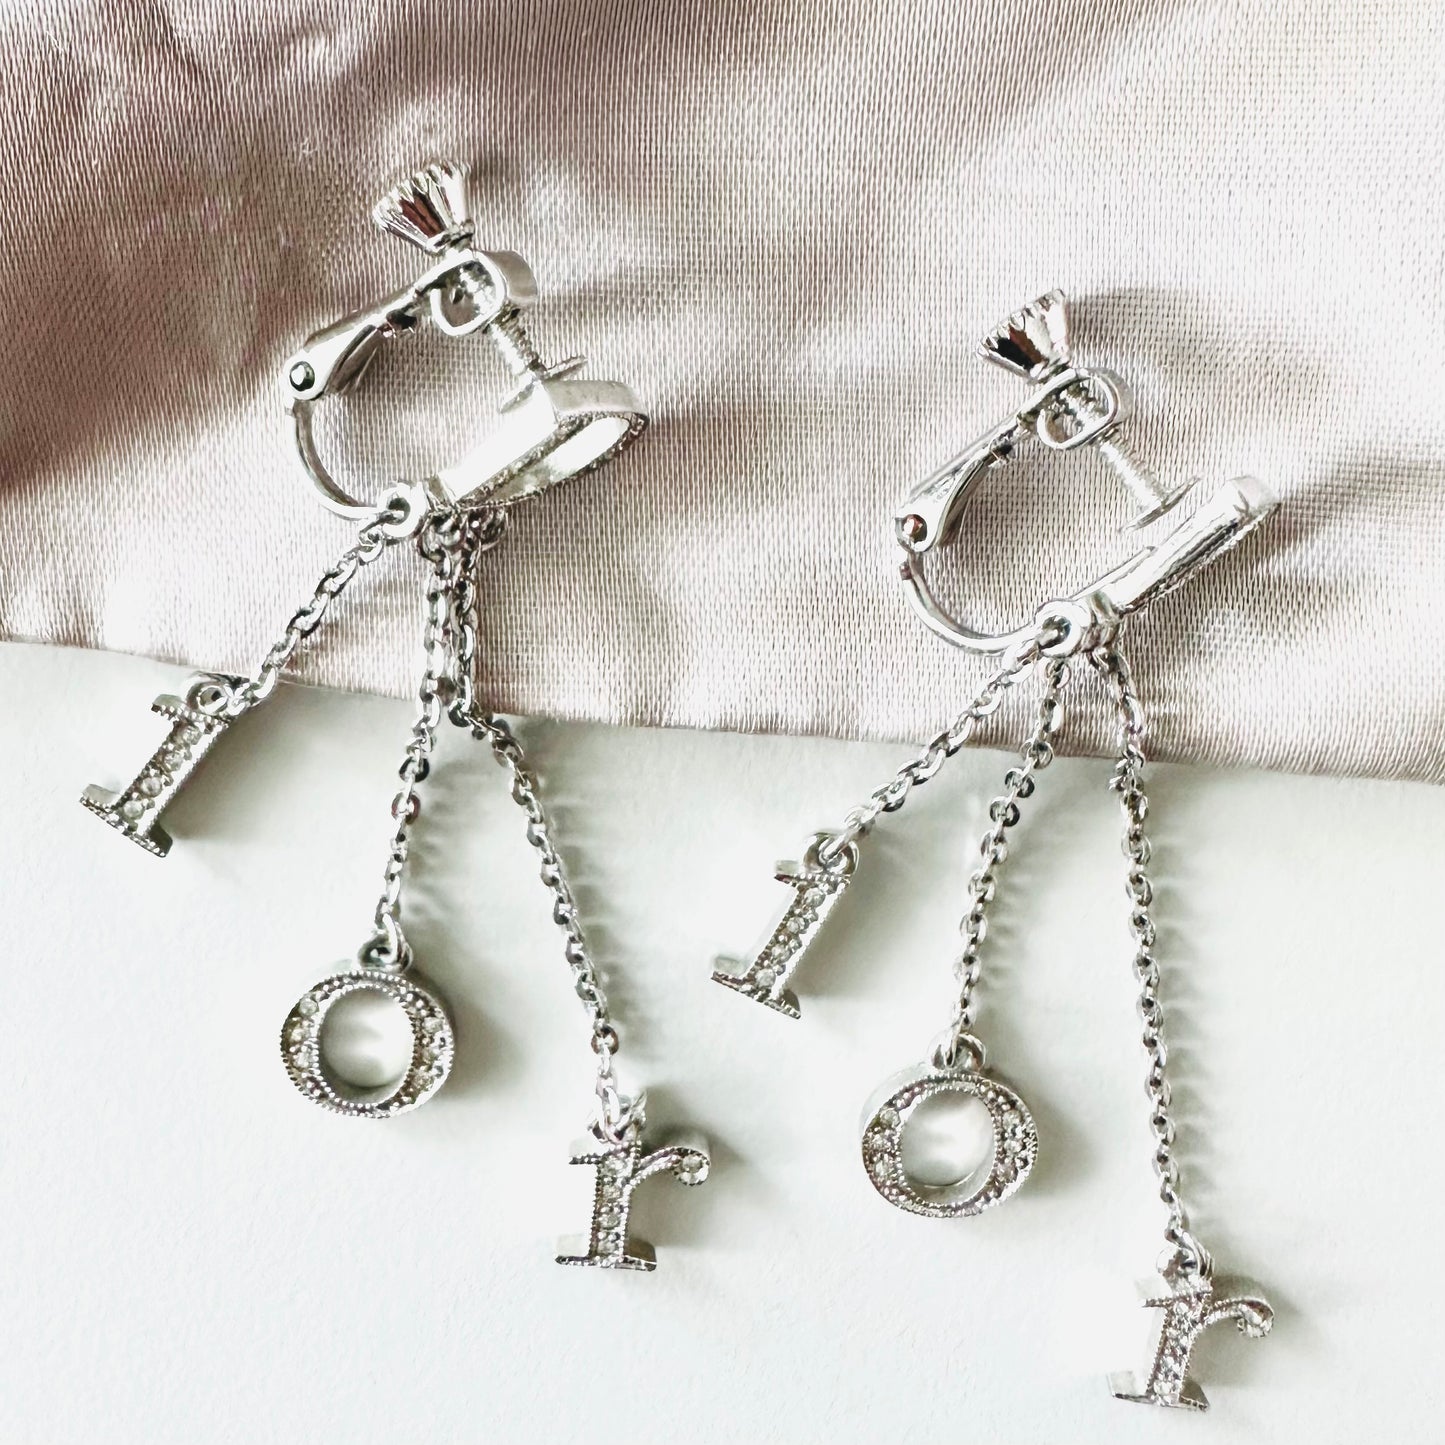 Christian Dior CD Monogram Logo Signature Classic Silver & Crystals Dangling Clip On Earrings